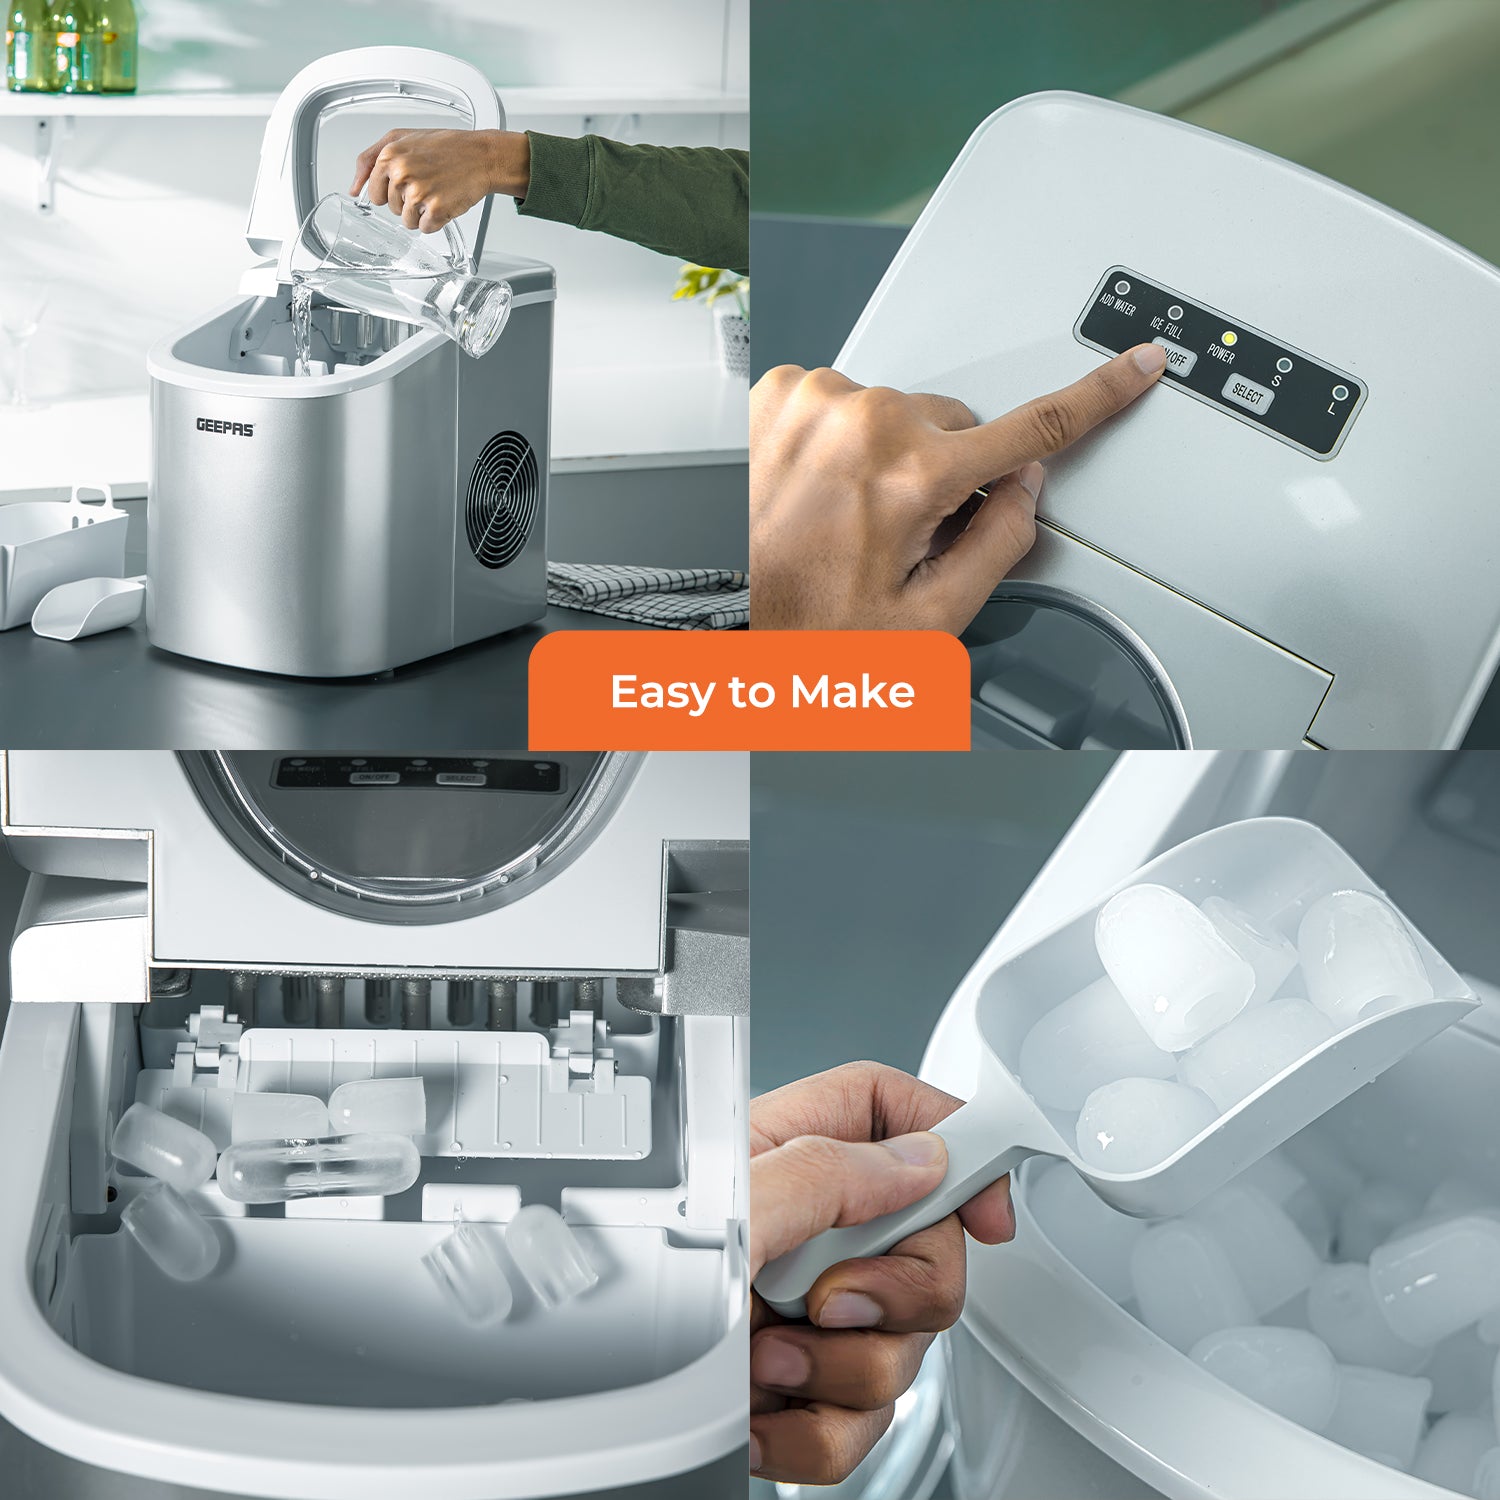 The image shows off the simplicity of using the machine, simply pour the water into the machine, select your settings on the control panel, wait, enjoy crisp ice cubes.